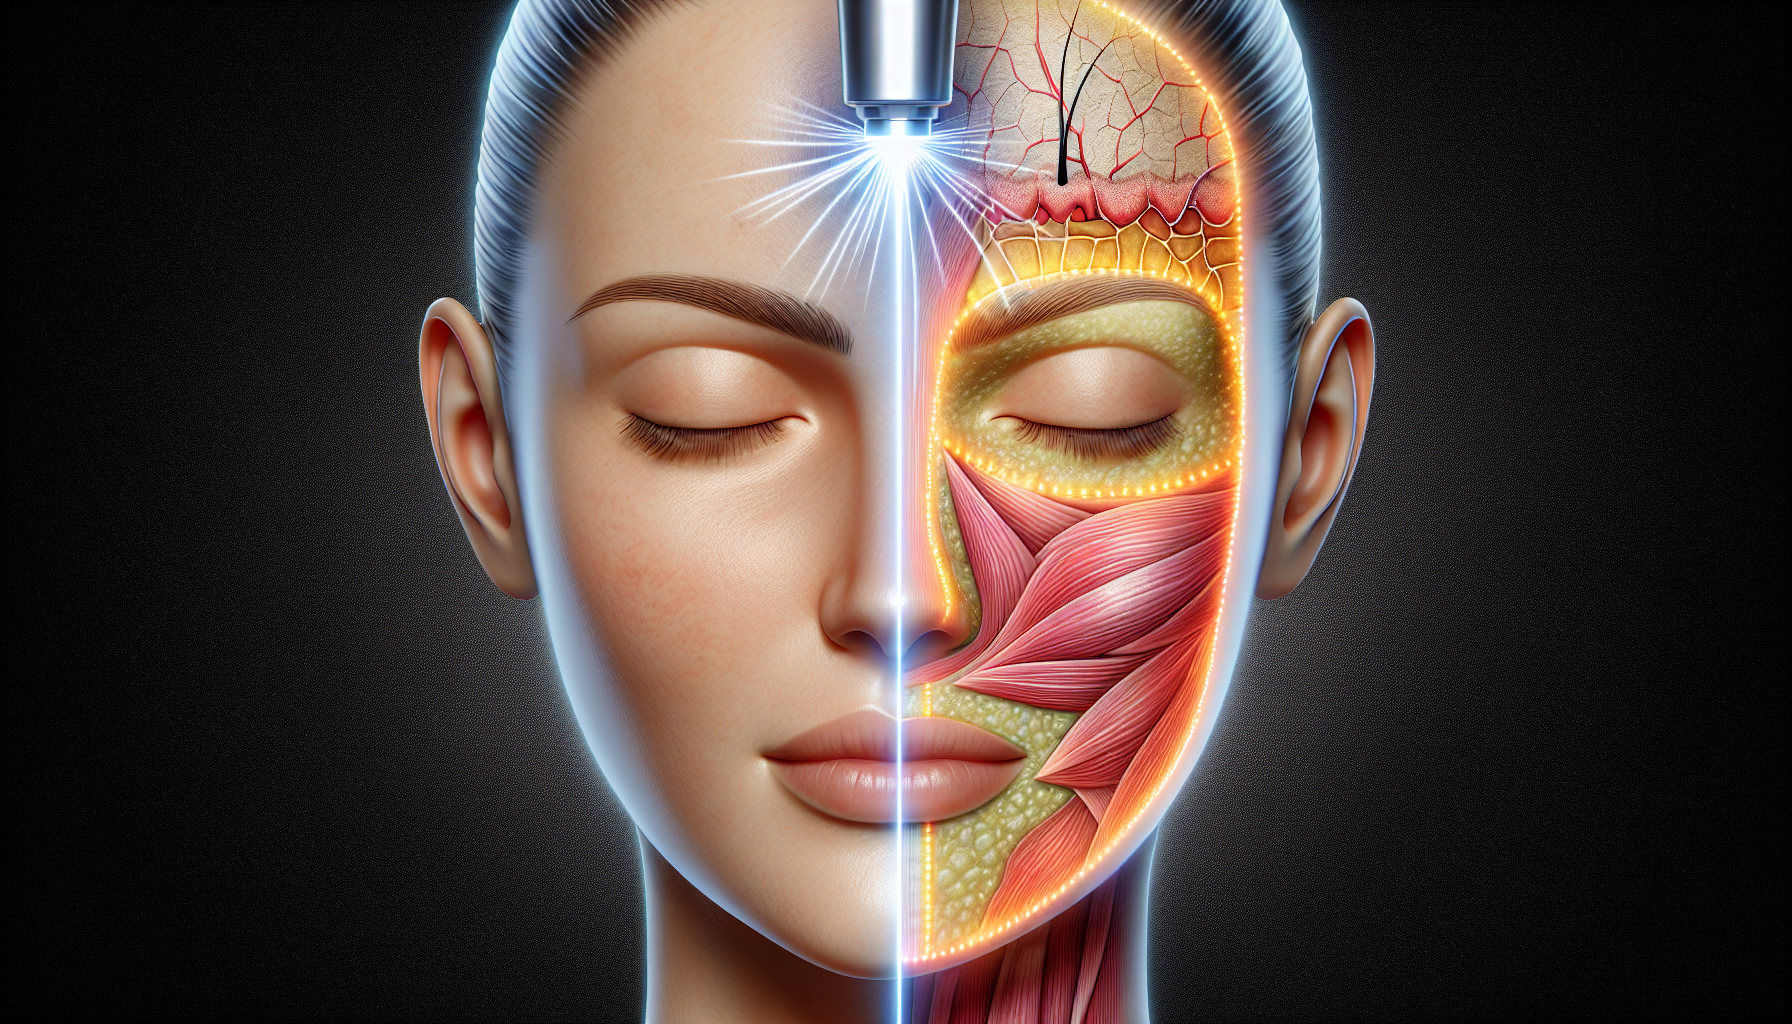 Illustration of radiofrequency technology for skin tightening treatments